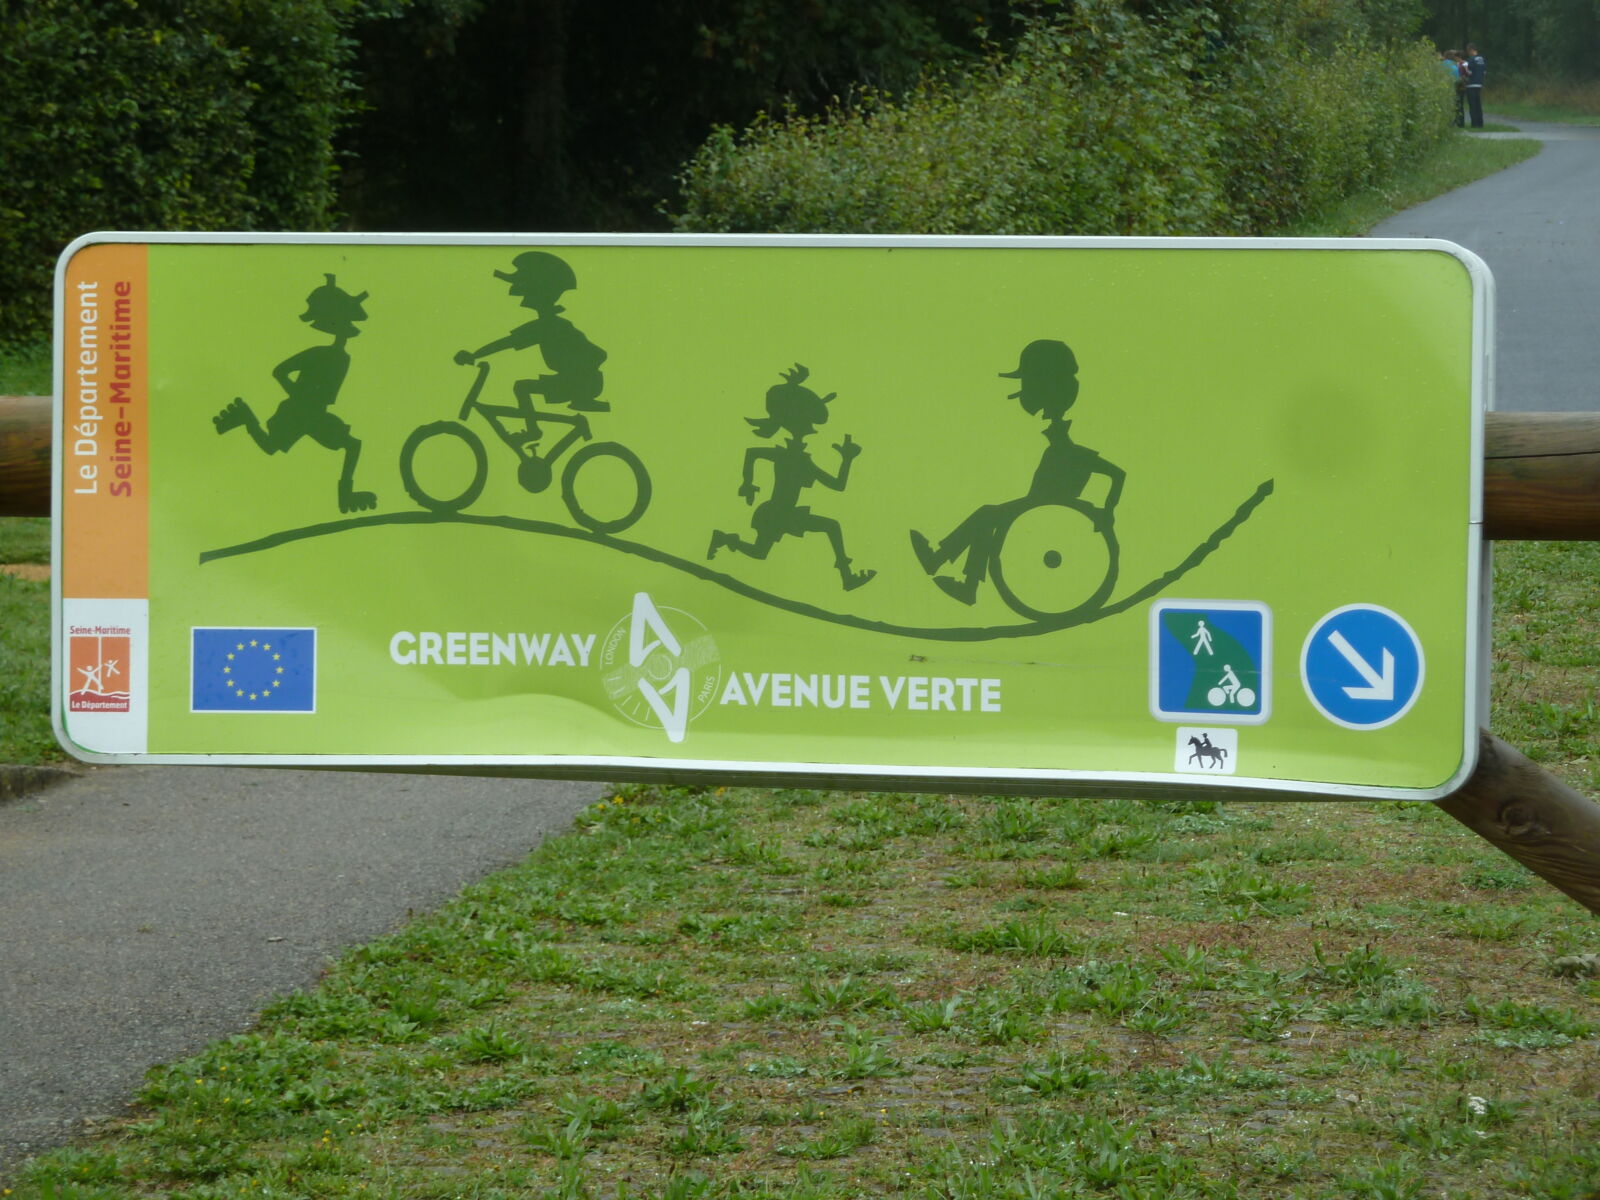 Avenue Verte sign with pictures of people cycling walking running and in a wheelchair